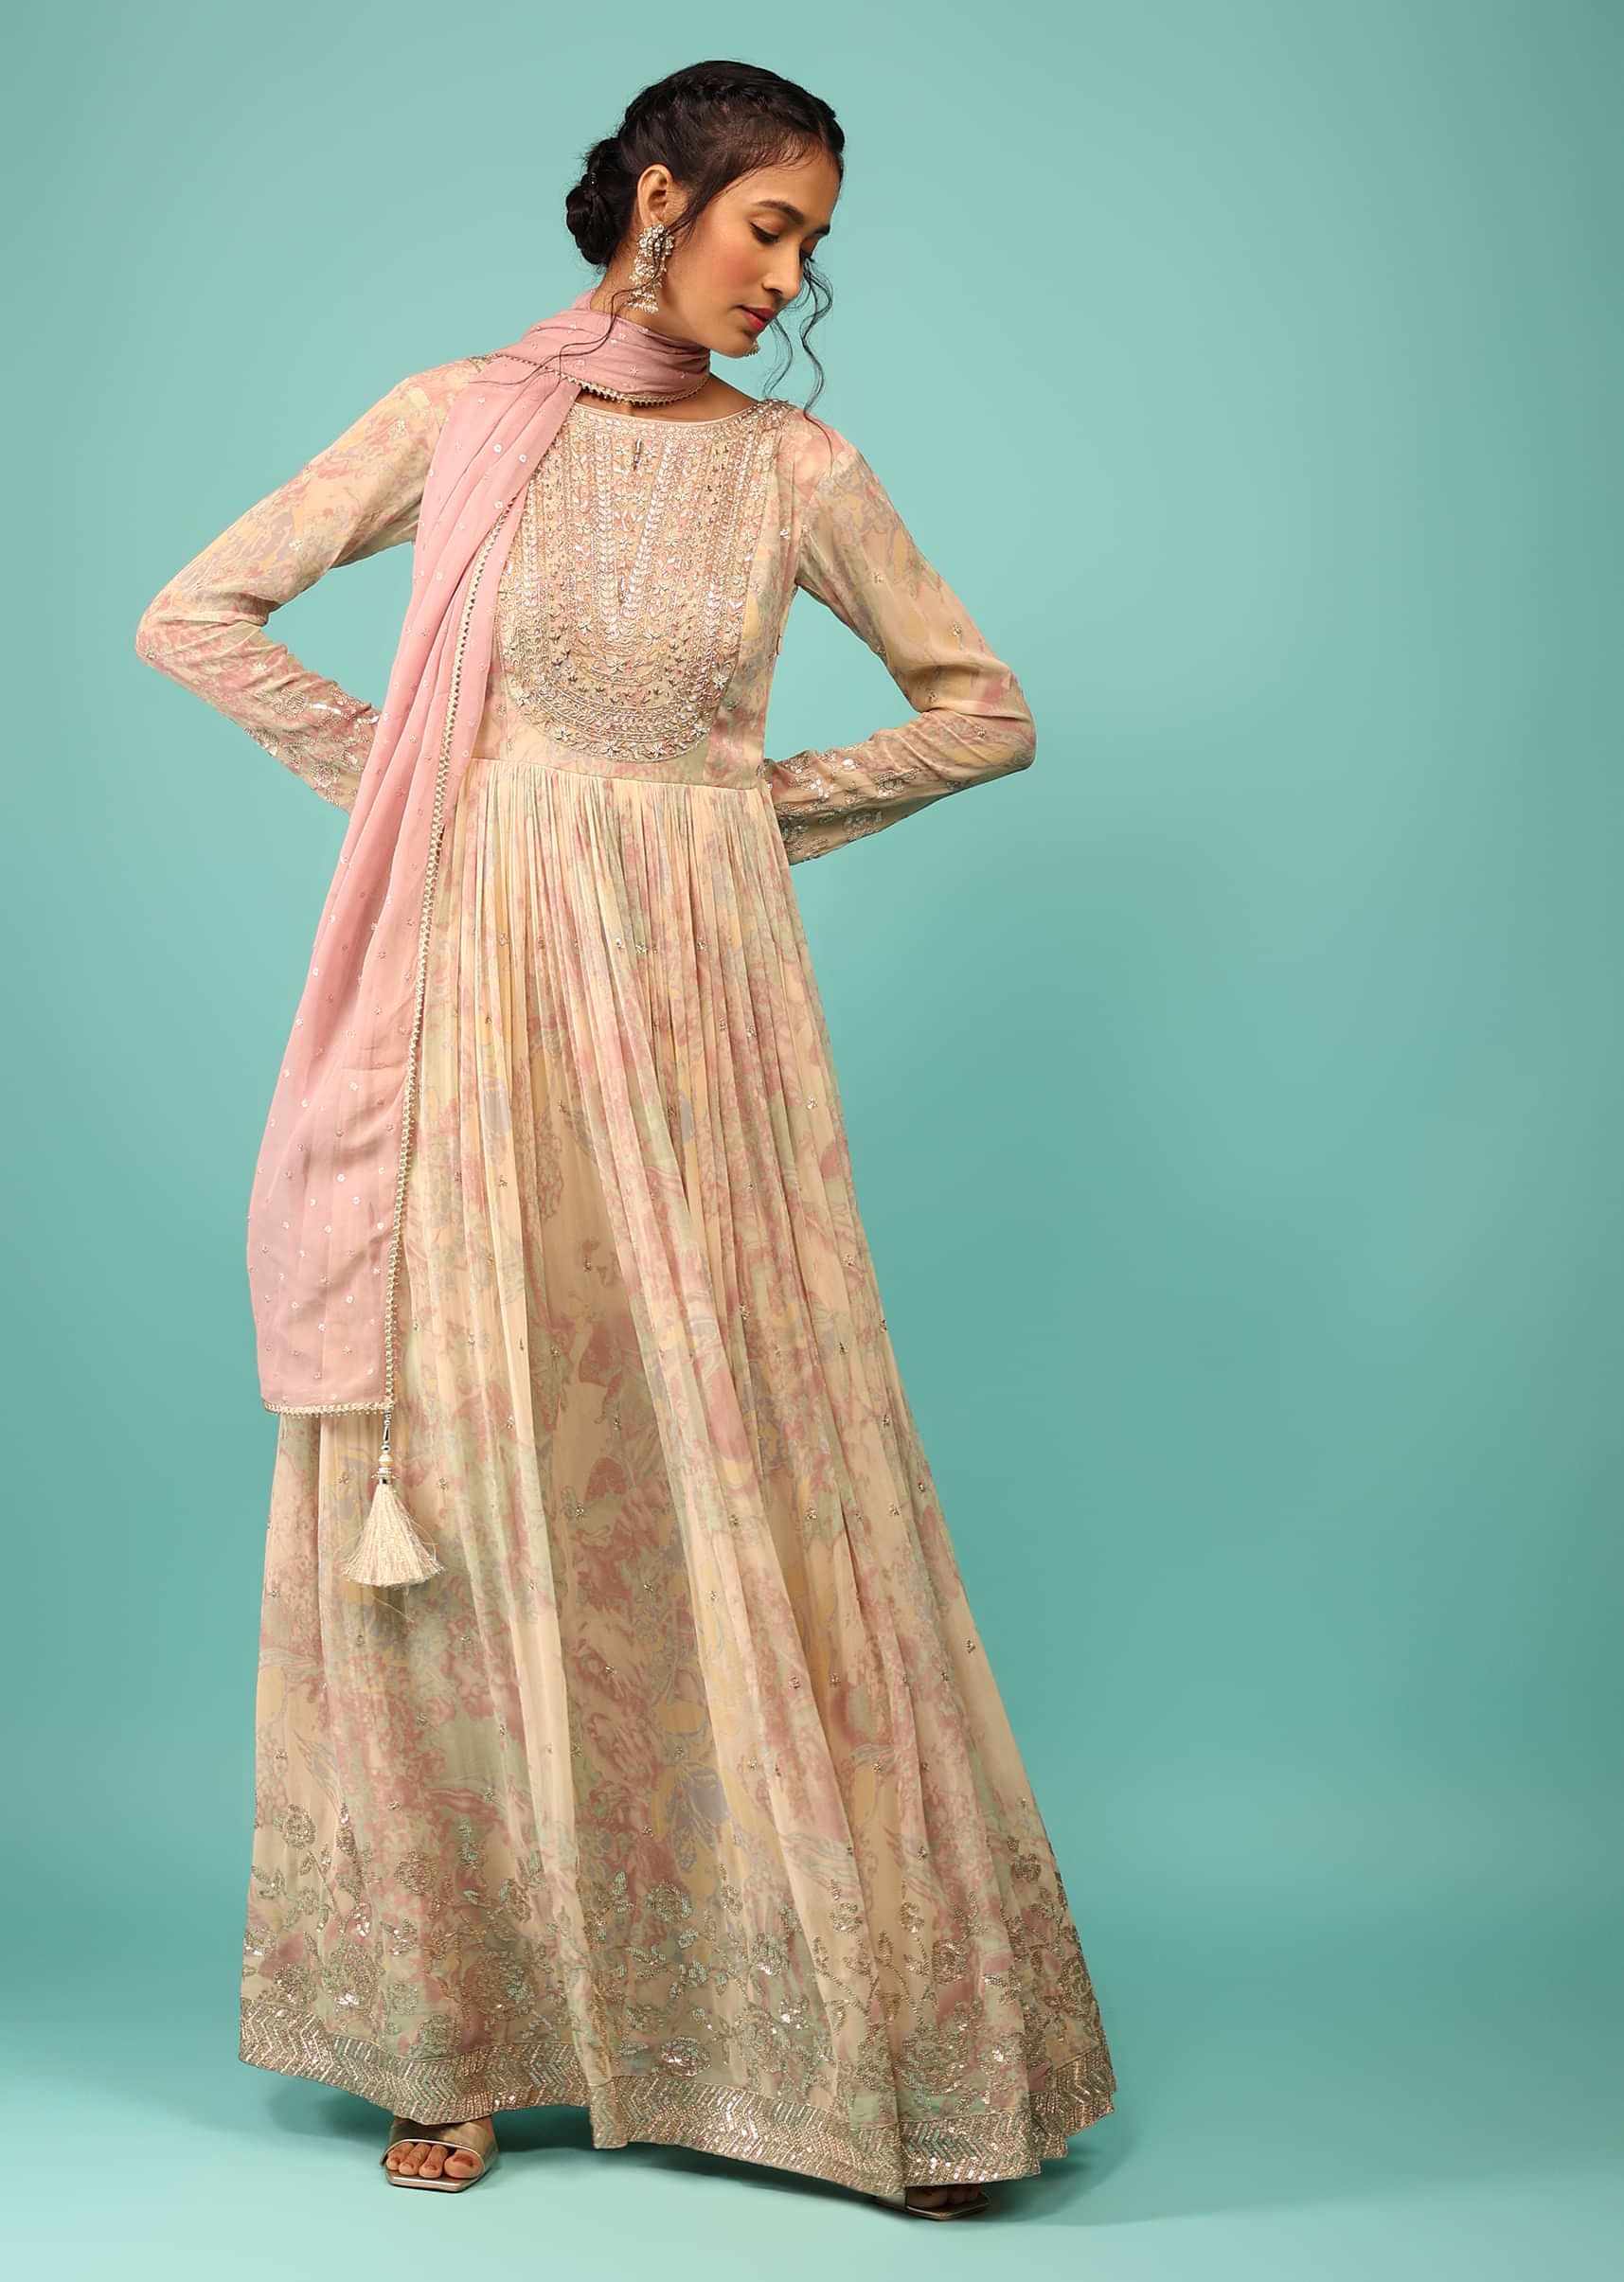 Multicoloured Anarkali Suit In Georgette With Floral Print, Embroidery And A Cameo Pink Dupatta